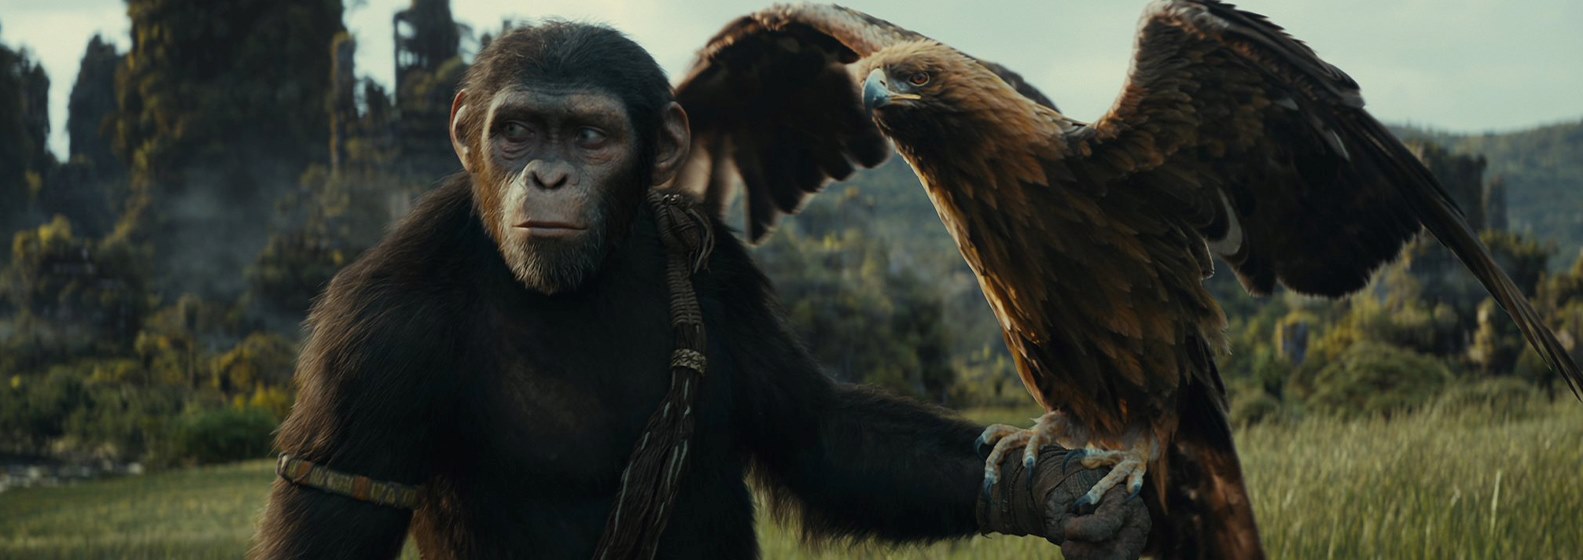 Kingdom of the Planet of the Apes - Header Image